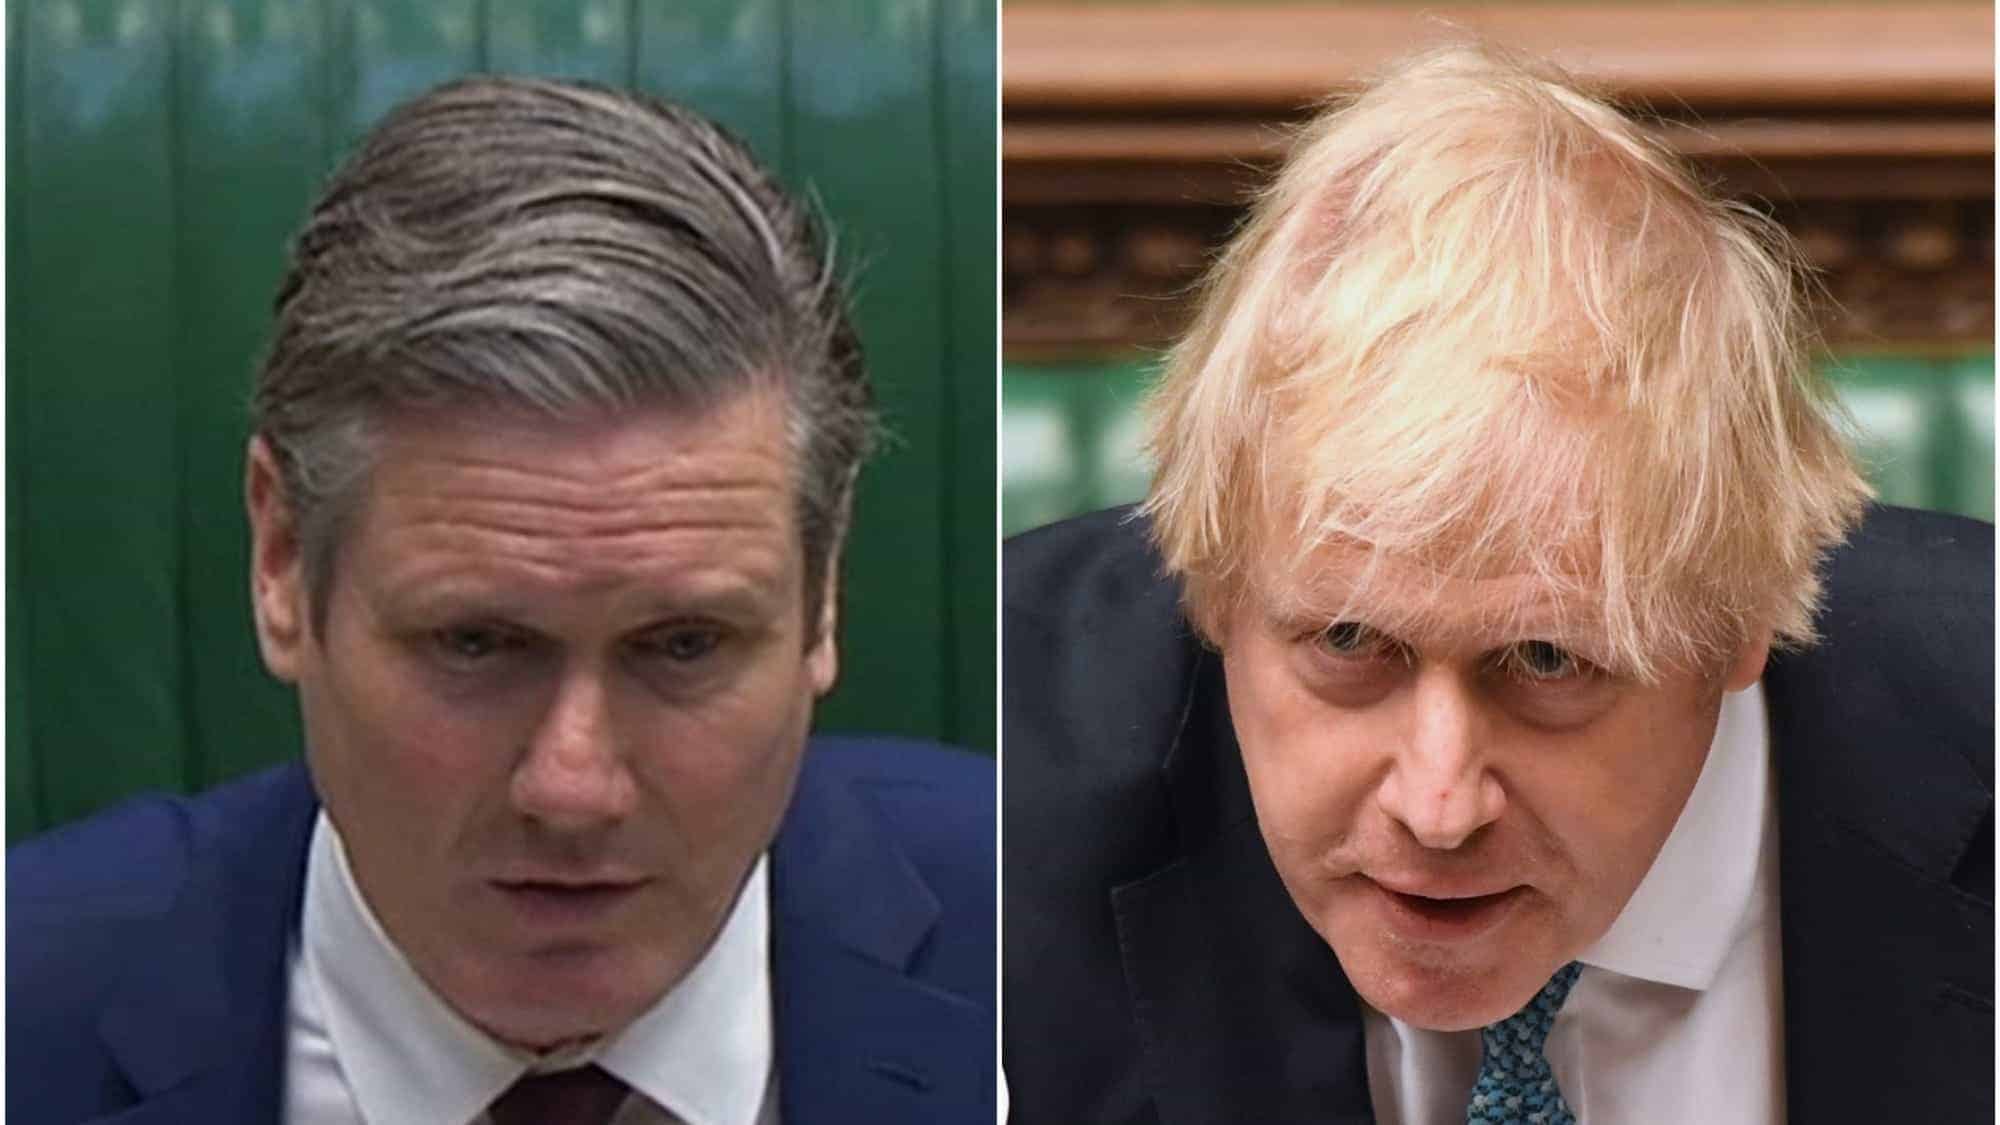 Starmer says Labour will back new Brexit legislation – if the PM addresses “substantial concerns”